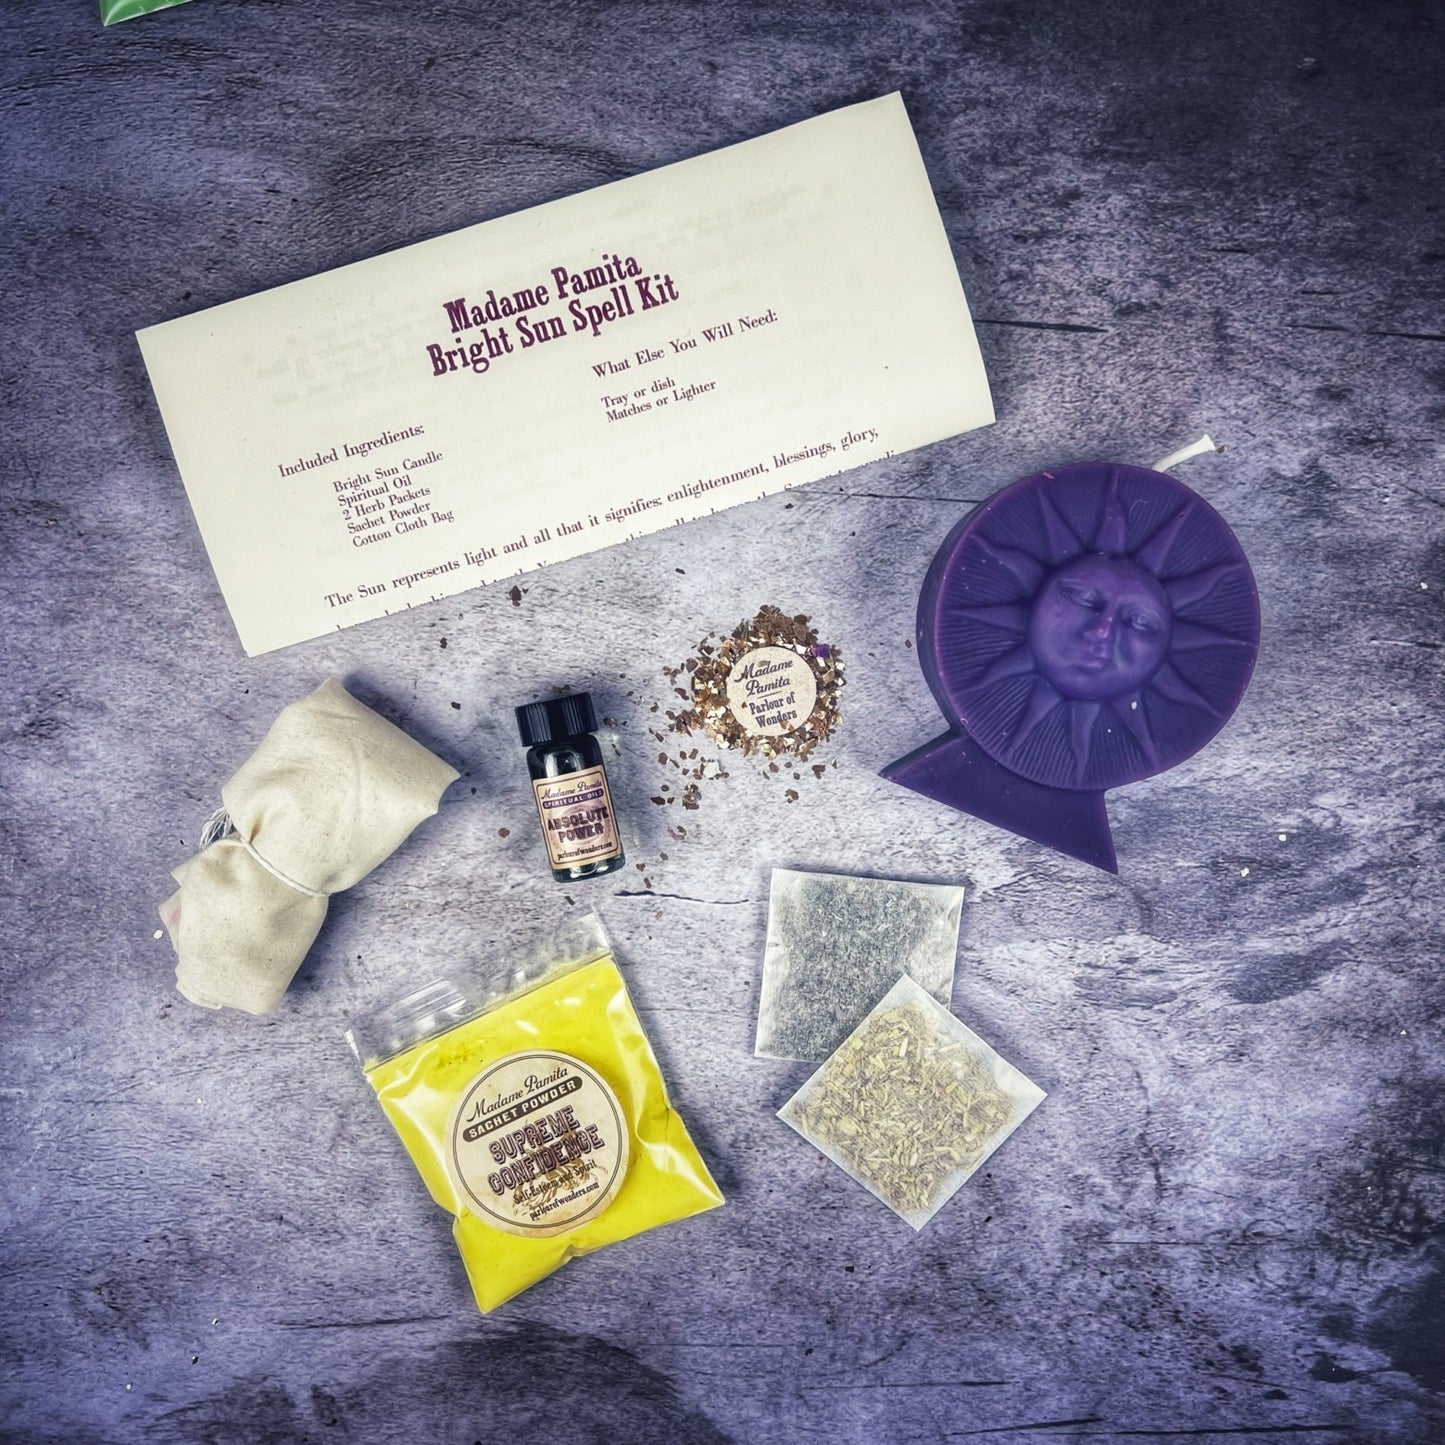 Bright Sun Candle Spell Kit